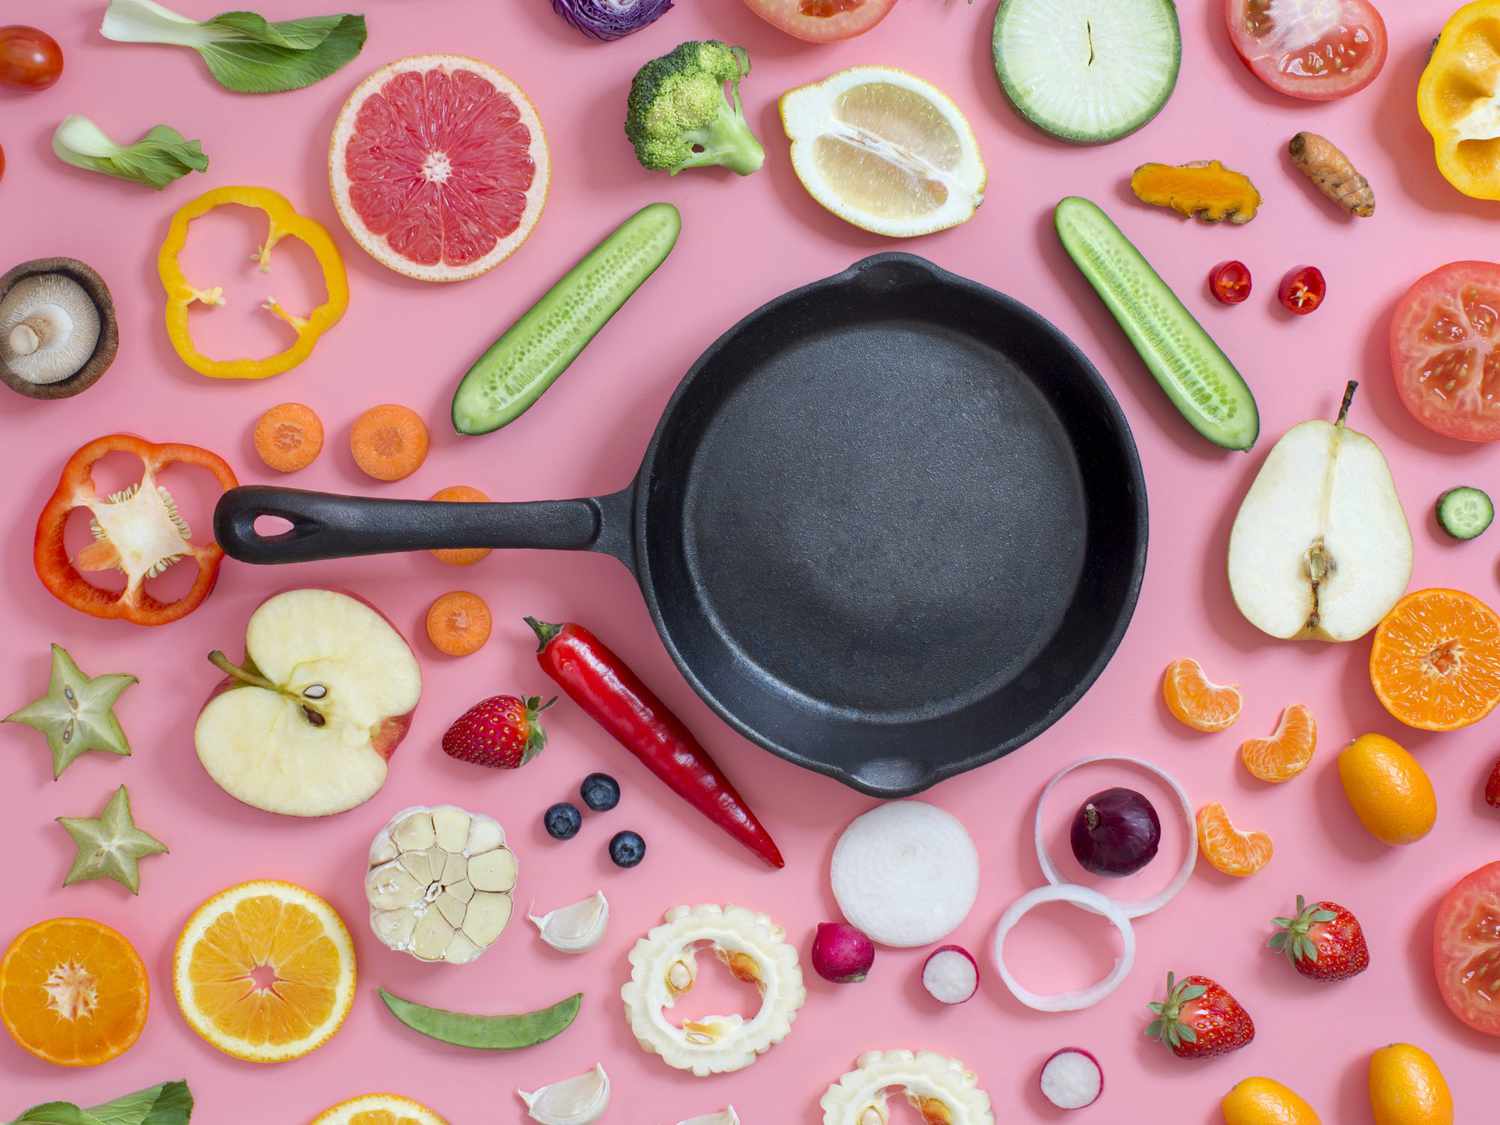 biggest-cooking-mistakes: cast iron pan surrounded by a variety of ingredients